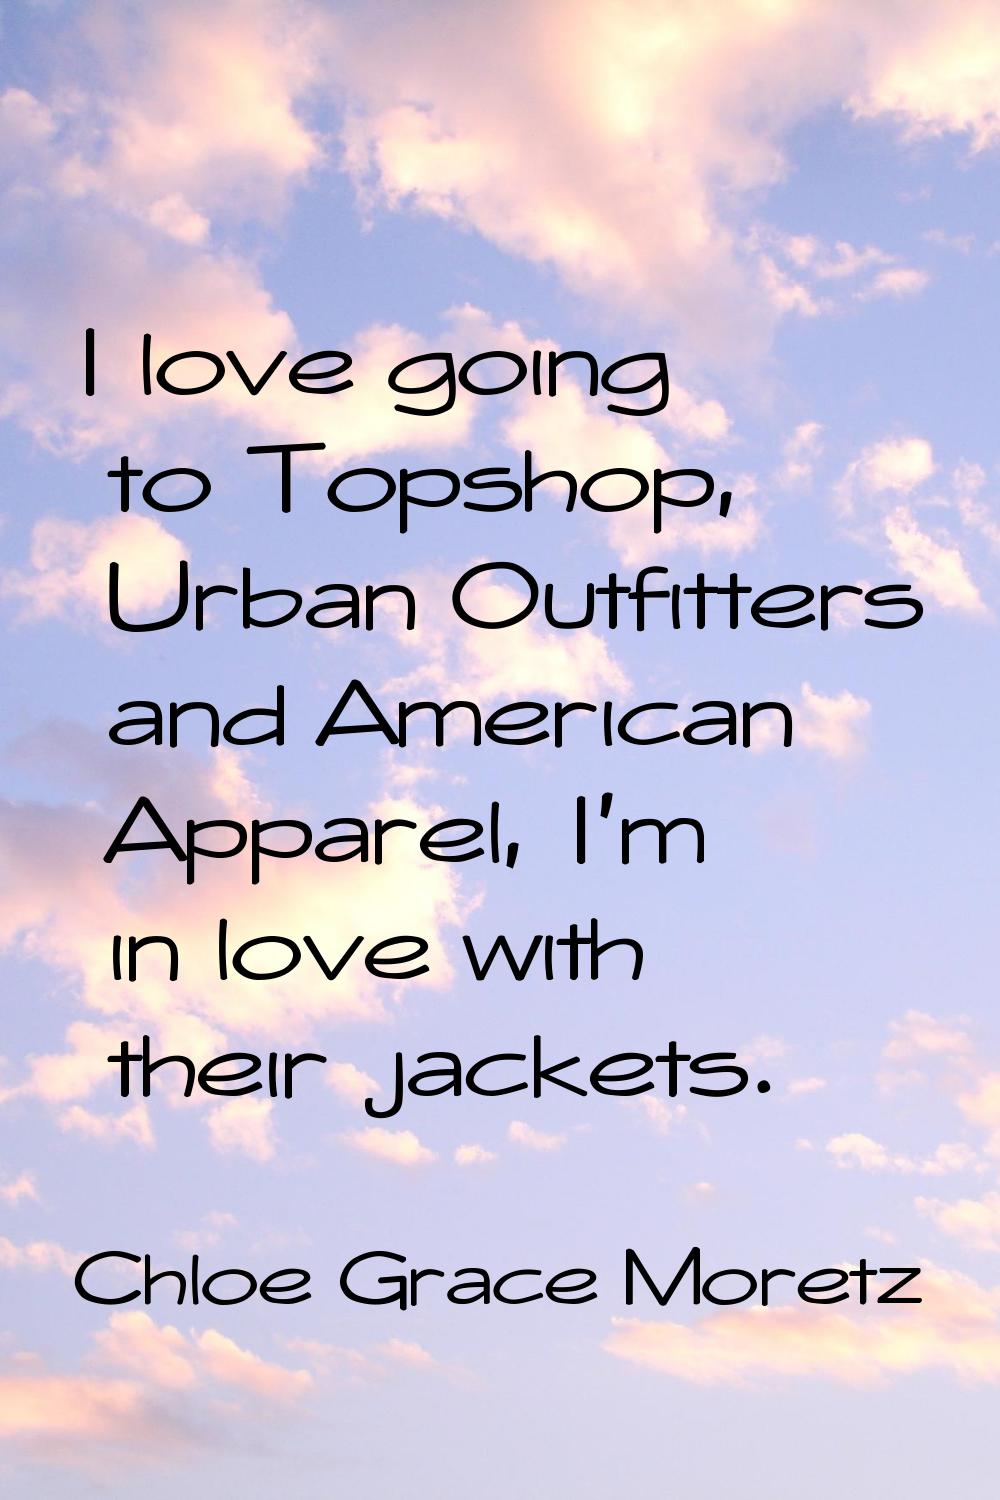 I love going to Topshop, Urban Outfitters and American Apparel, I'm in love with their jackets.